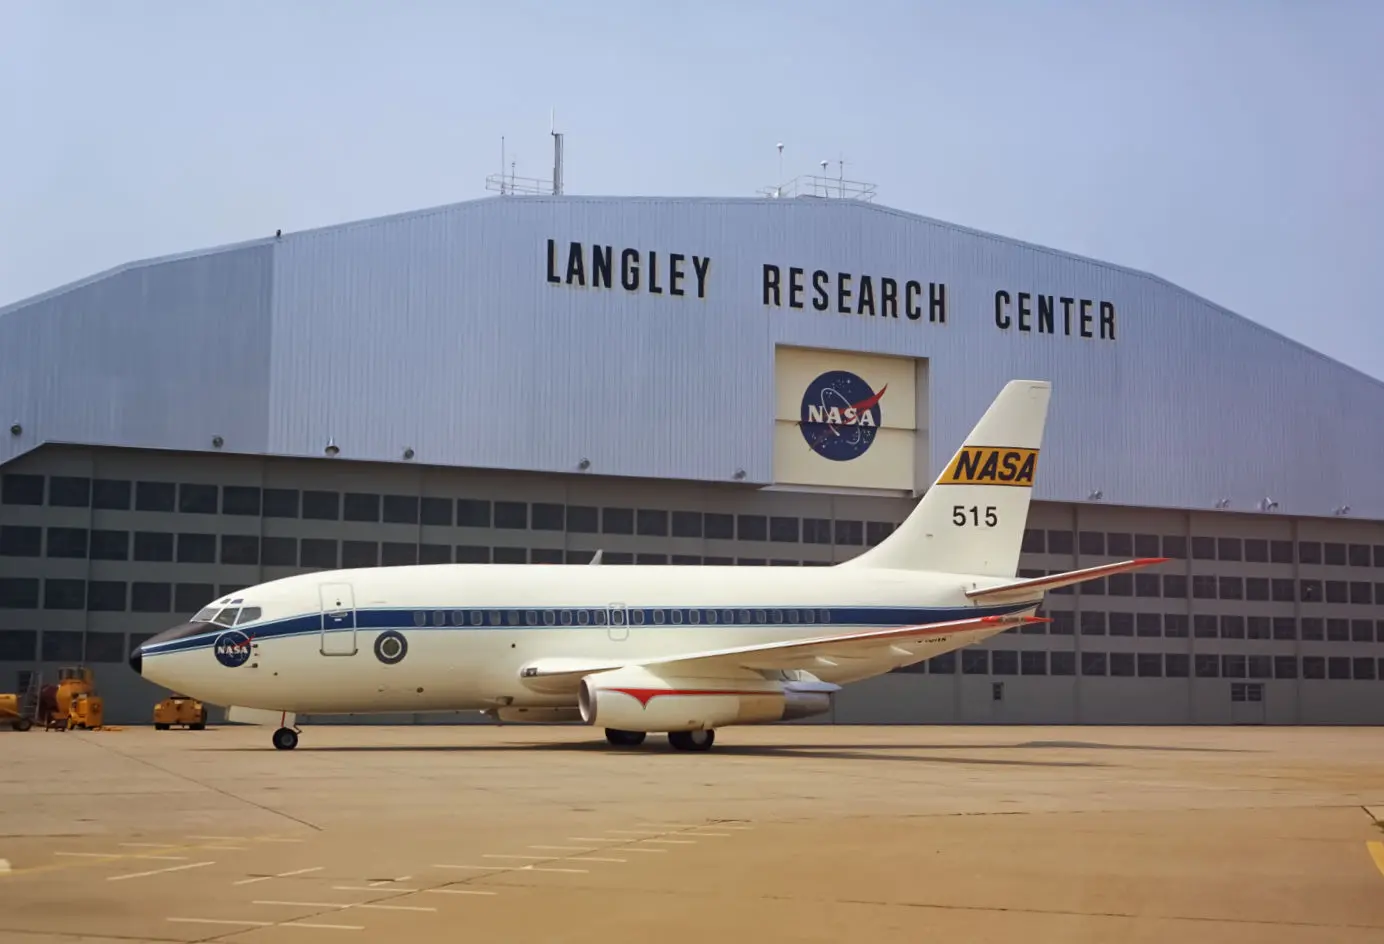 The first Boeing 737 in NASA livery